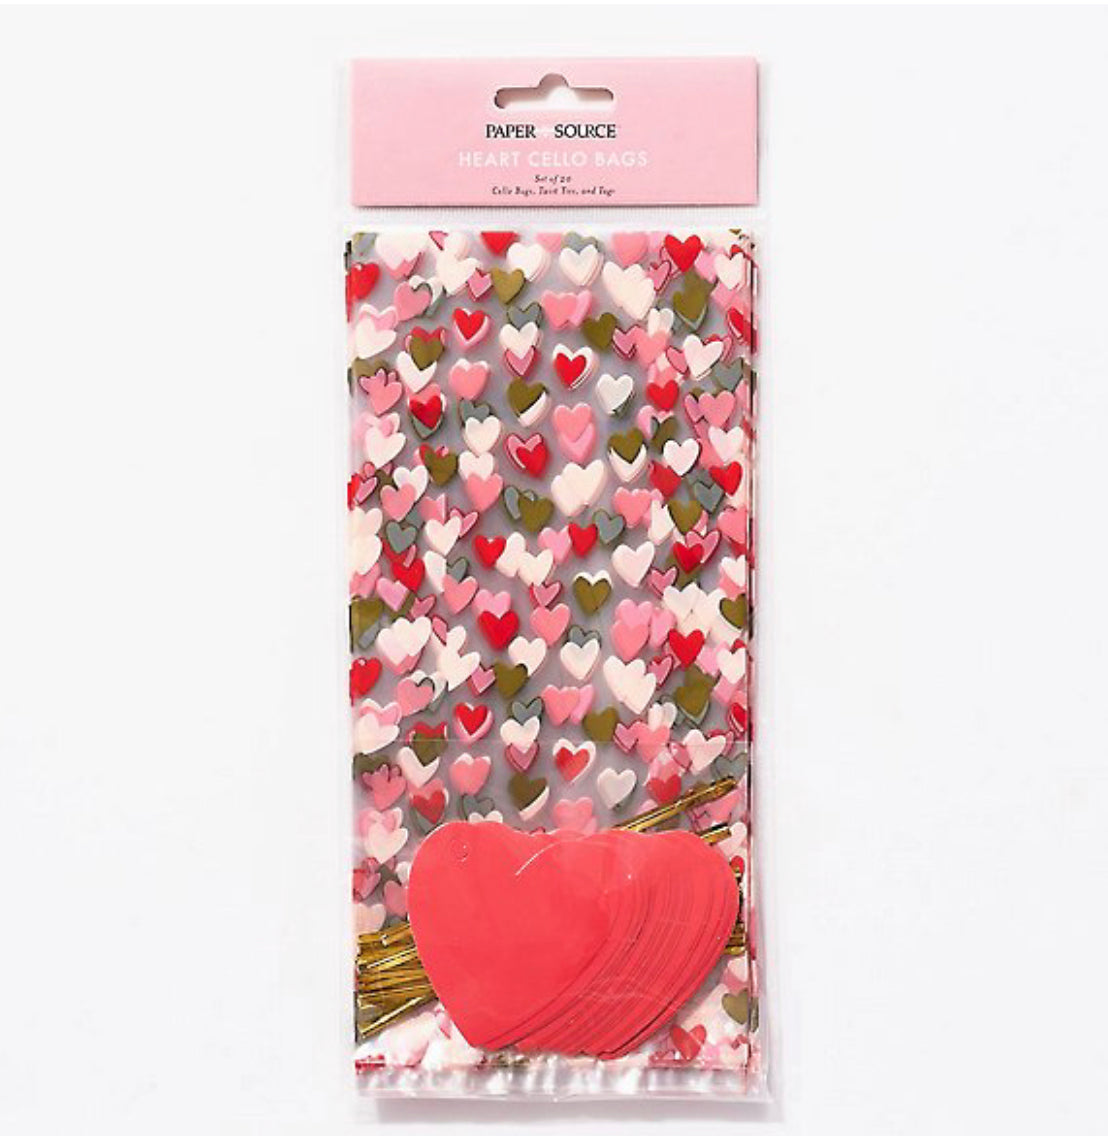 Paper Source "Heart Cello Bags w/Tags" (Pack of 20)